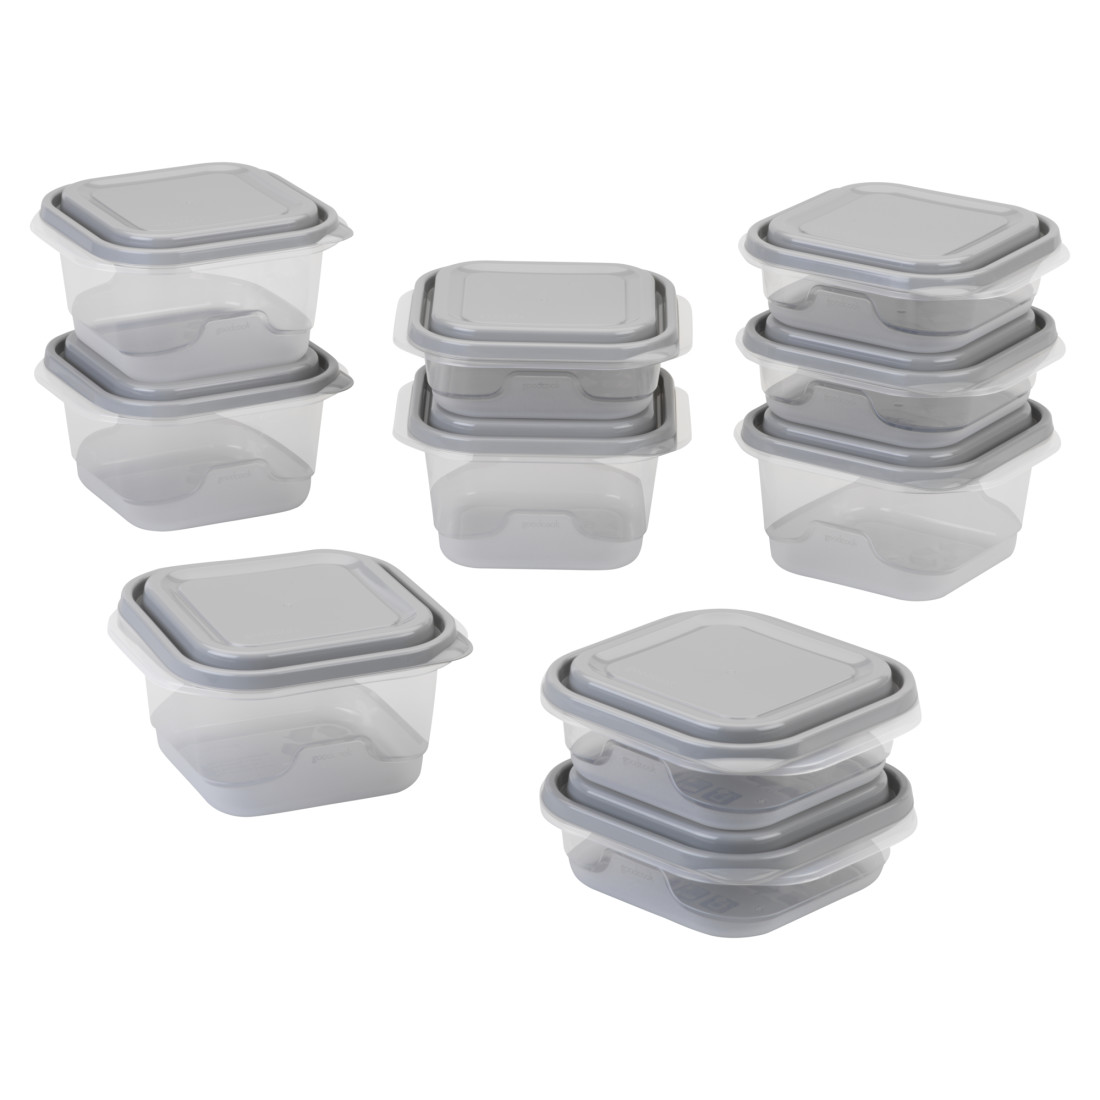 5.2-Cup Food Container, large square, 4-Piece Set - GoodCook